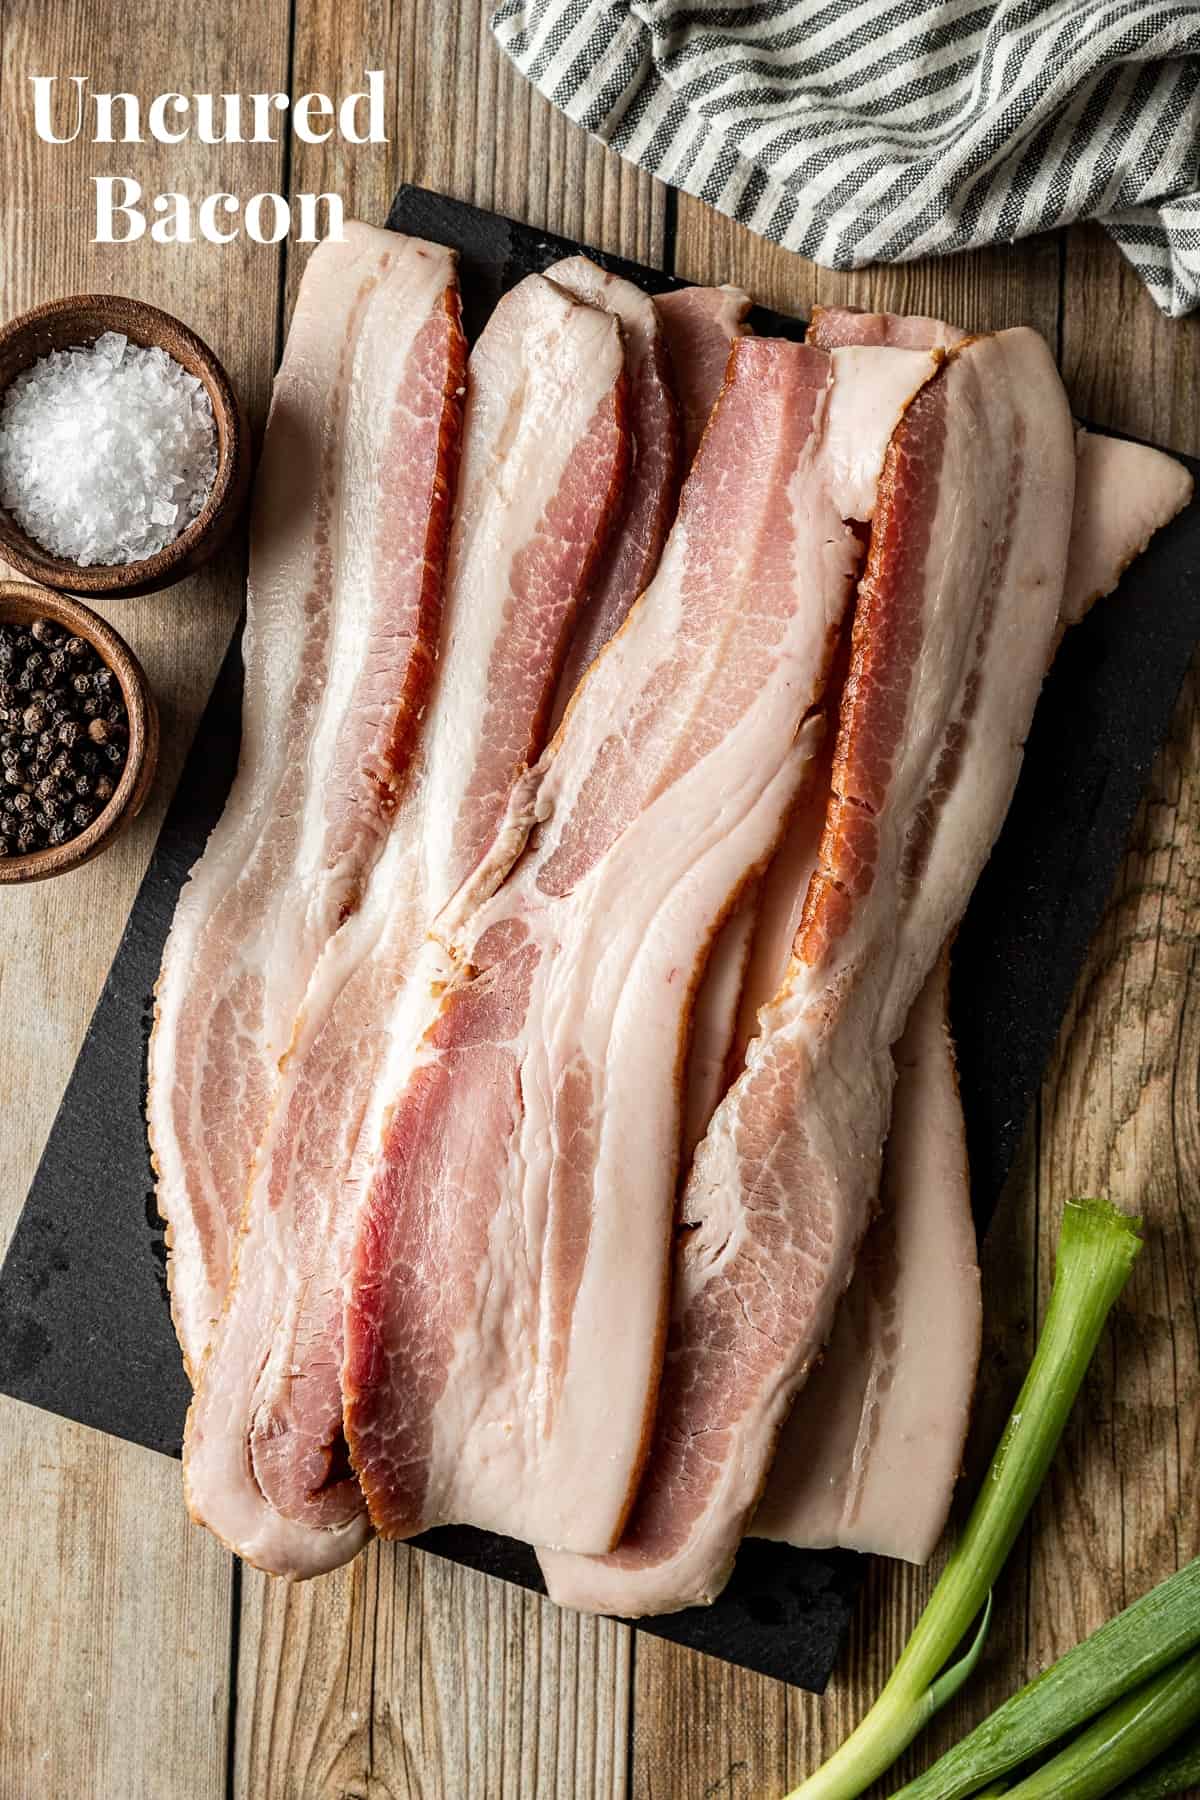 An overview shot of raw bacon slices on a black cutting board..